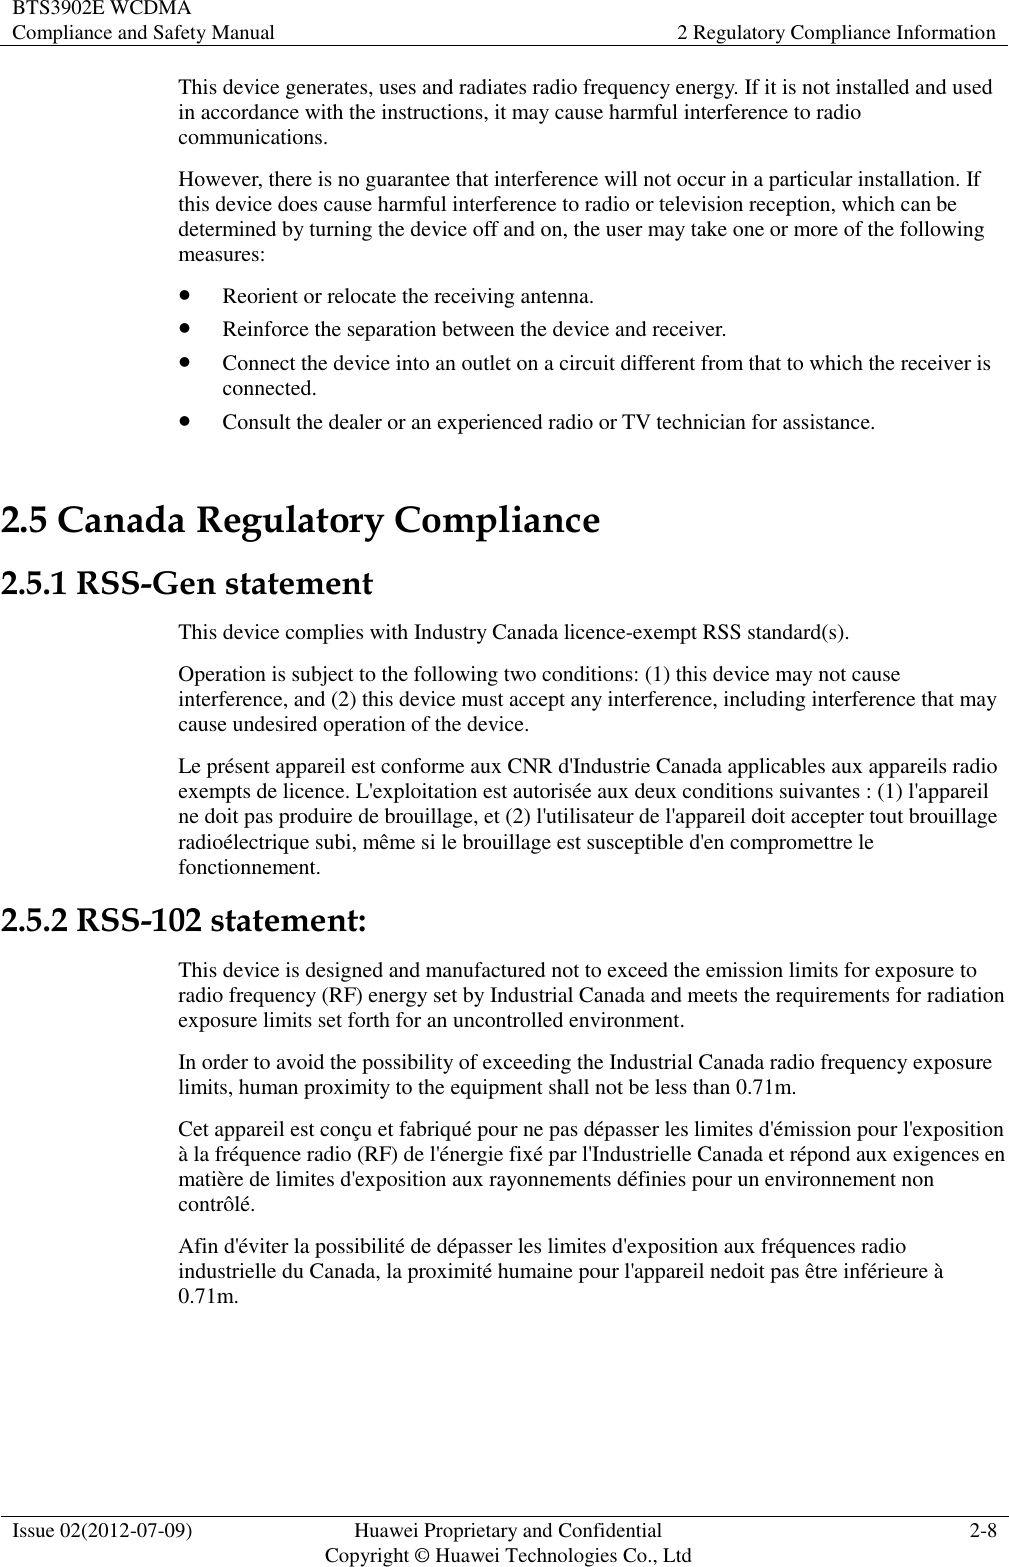 BTS3902E WCDMA Compliance and Safety Manual 2 Regulatory Compliance Information  Issue 02(2012-07-09) Huawei Proprietary and Confidential           Copyright © Huawei Technologies Co., Ltd 2-8  This device generates, uses and radiates radio frequency energy. If it is not installed and used in accordance with the instructions, it may cause harmful interference to radio communications. However, there is no guarantee that interference will not occur in a particular installation. If this device does cause harmful interference to radio or television reception, which can be determined by turning the device off and on, the user may take one or more of the following measures:  Reorient or relocate the receiving antenna.  Reinforce the separation between the device and receiver.  Connect the device into an outlet on a circuit different from that to which the receiver is connected.  Consult the dealer or an experienced radio or TV technician for assistance. 2.5 Canada Regulatory Compliance 2.5.1 RSS-Gen statement This device complies with Industry Canada licence-exempt RSS standard(s). Operation is subject to the following two conditions: (1) this device may not cause interference, and (2) this device must accept any interference, including interference that may cause undesired operation of the device. Le présent appareil est conforme aux CNR d&apos;Industrie Canada applicables aux appareils radio exempts de licence. L&apos;exploitation est autorisée aux deux conditions suivantes : (1) l&apos;appareil ne doit pas produire de brouillage, et (2) l&apos;utilisateur de l&apos;appareil doit accepter tout brouillage radioélectrique subi, même si le brouillage est susceptible d&apos;en compromettre le fonctionnement. 2.5.2 RSS-102 statement: This device is designed and manufactured not to exceed the emission limits for exposure to radio frequency (RF) energy set by Industrial Canada and meets the requirements for radiation exposure limits set forth for an uncontrolled environment. In order to avoid the possibility of exceeding the Industrial Canada radio frequency exposure limits, human proximity to the equipment shall not be less than 0.71m. Cet appareil est conçu et fabriqué pour ne pas dépasser les limites d&apos;émission pour l&apos;exposition à la fréquence radio (RF) de l&apos;énergie fixé par l&apos;Industrielle Canada et répond aux exigences en matière de limites d&apos;exposition aux rayonnements définies pour un environnement non contrôlé.   Afin d&apos;éviter la possibilité de dépasser les limites d&apos;exposition aux fréquences radio industrielle du Canada, la proximité humaine pour l&apos;appareil nedoit pas être inférieure à 0.71m.  